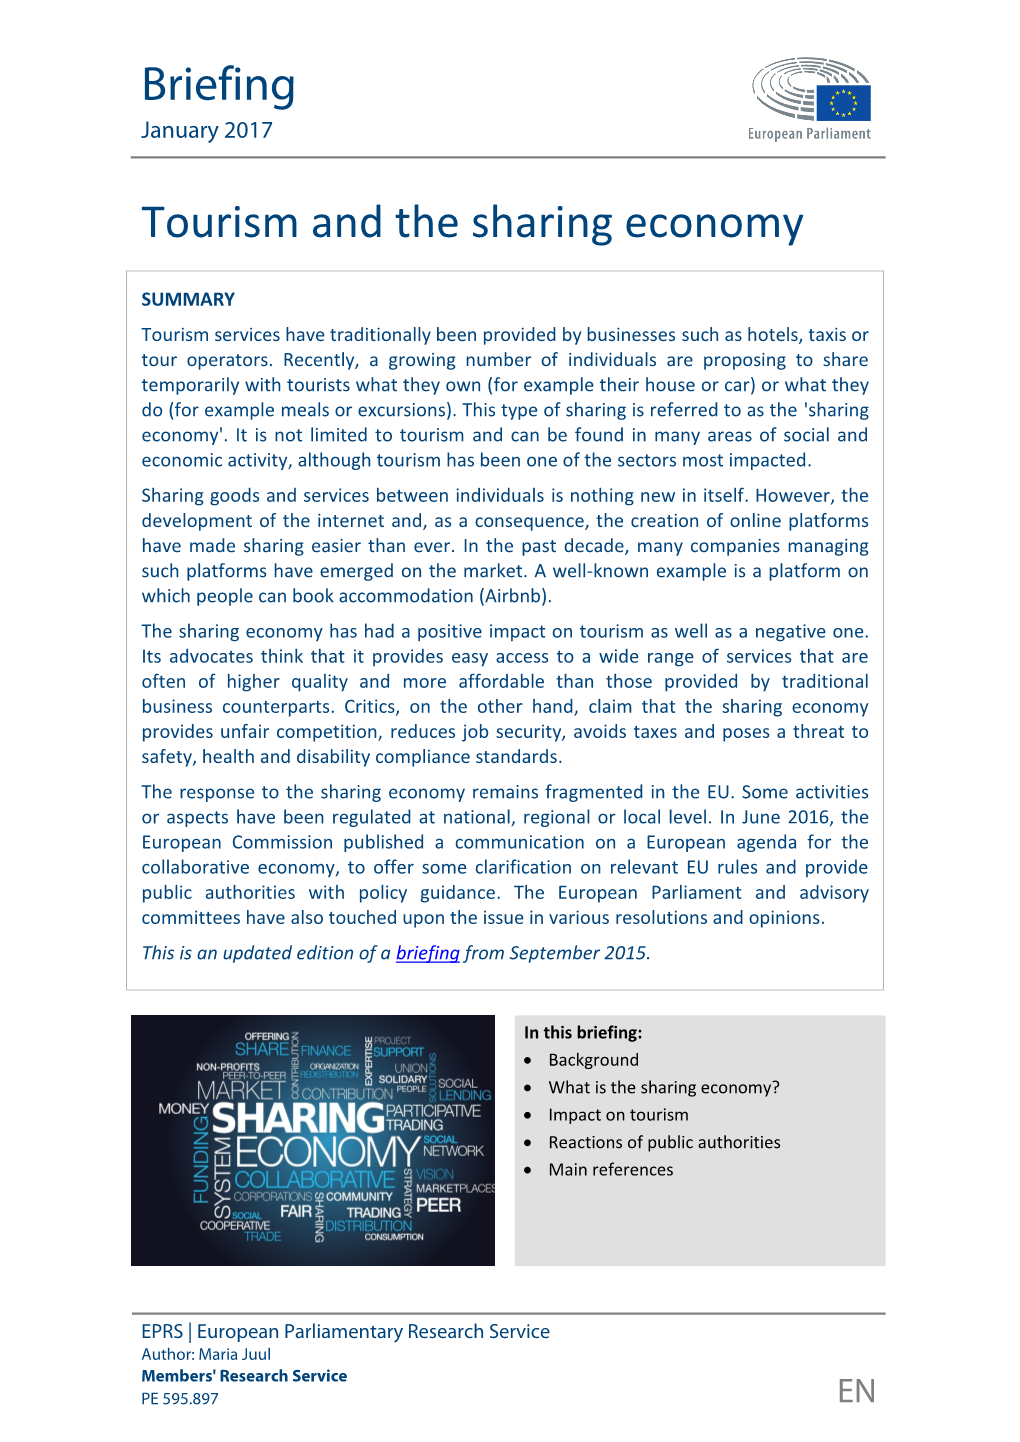 The Sharing Economy and Tourism